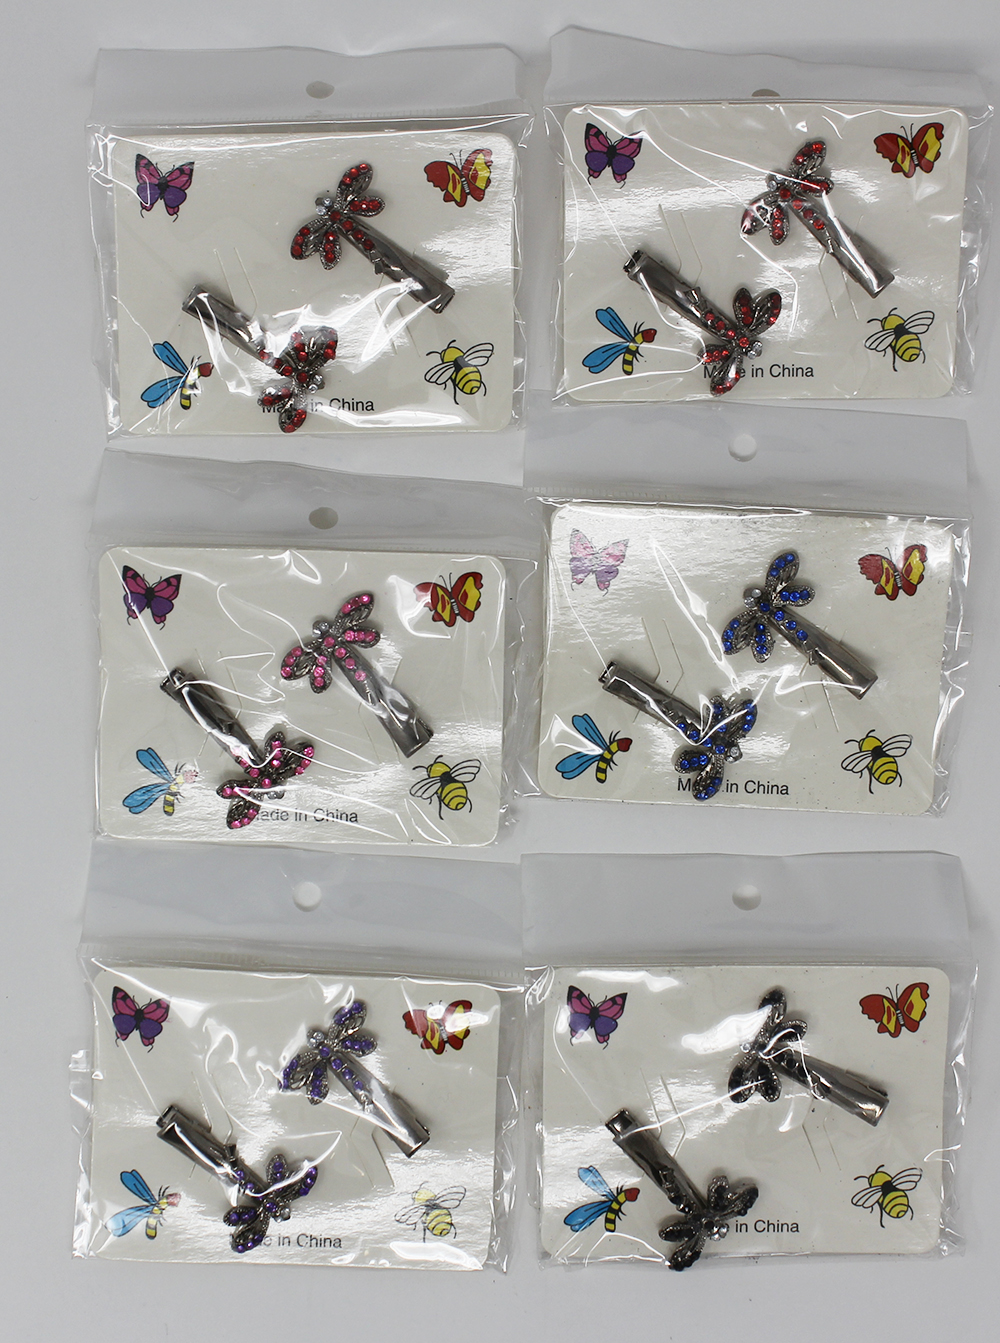 INSECTOPIA RHINESTONE DRAGONFLY SALON CLIPS, 2 COUNT PACK - Click Image to Close